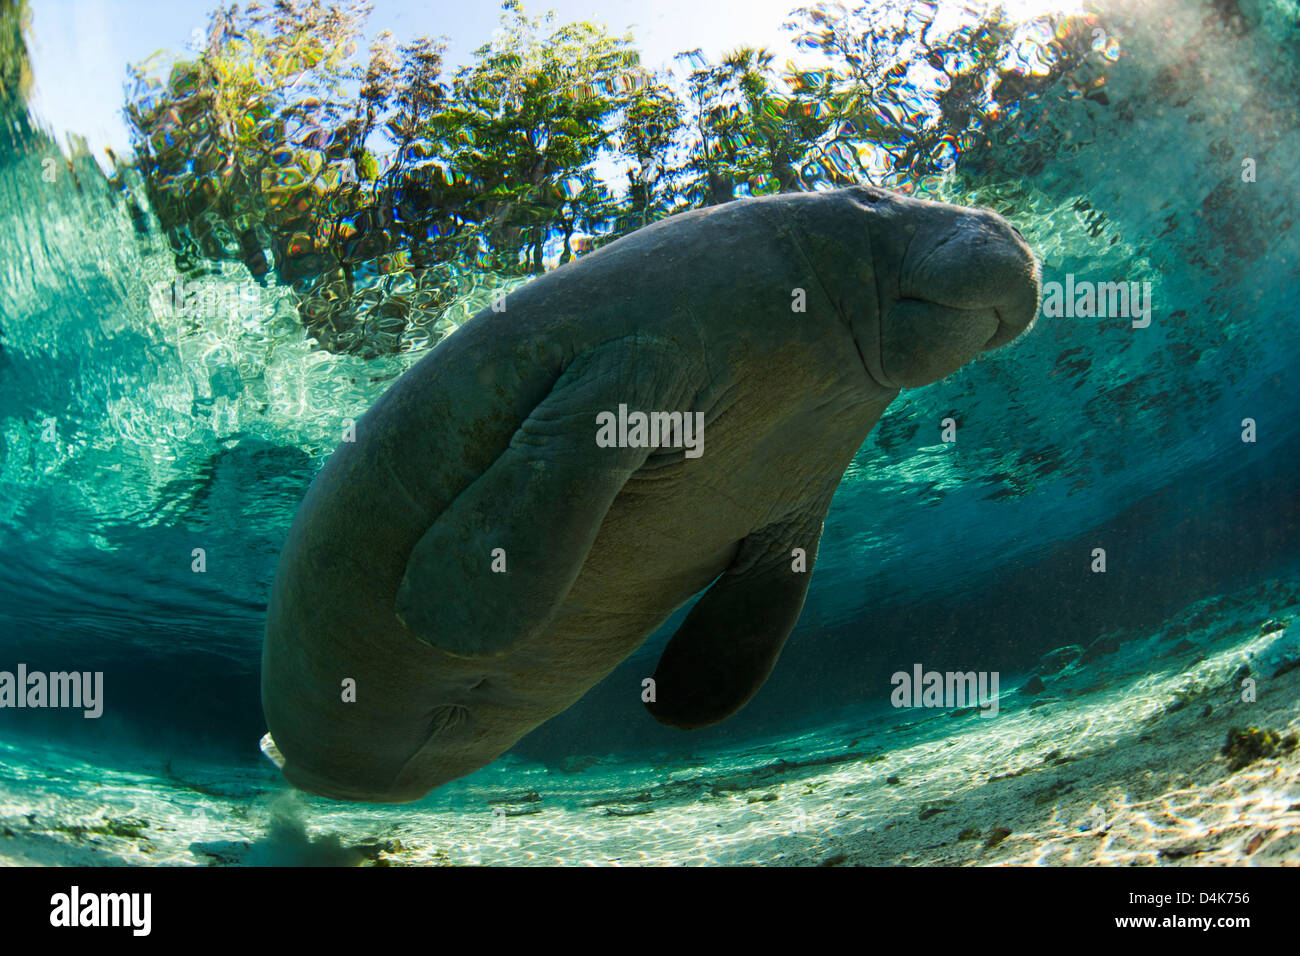 Manatee swimming in tropical water Stock Photo